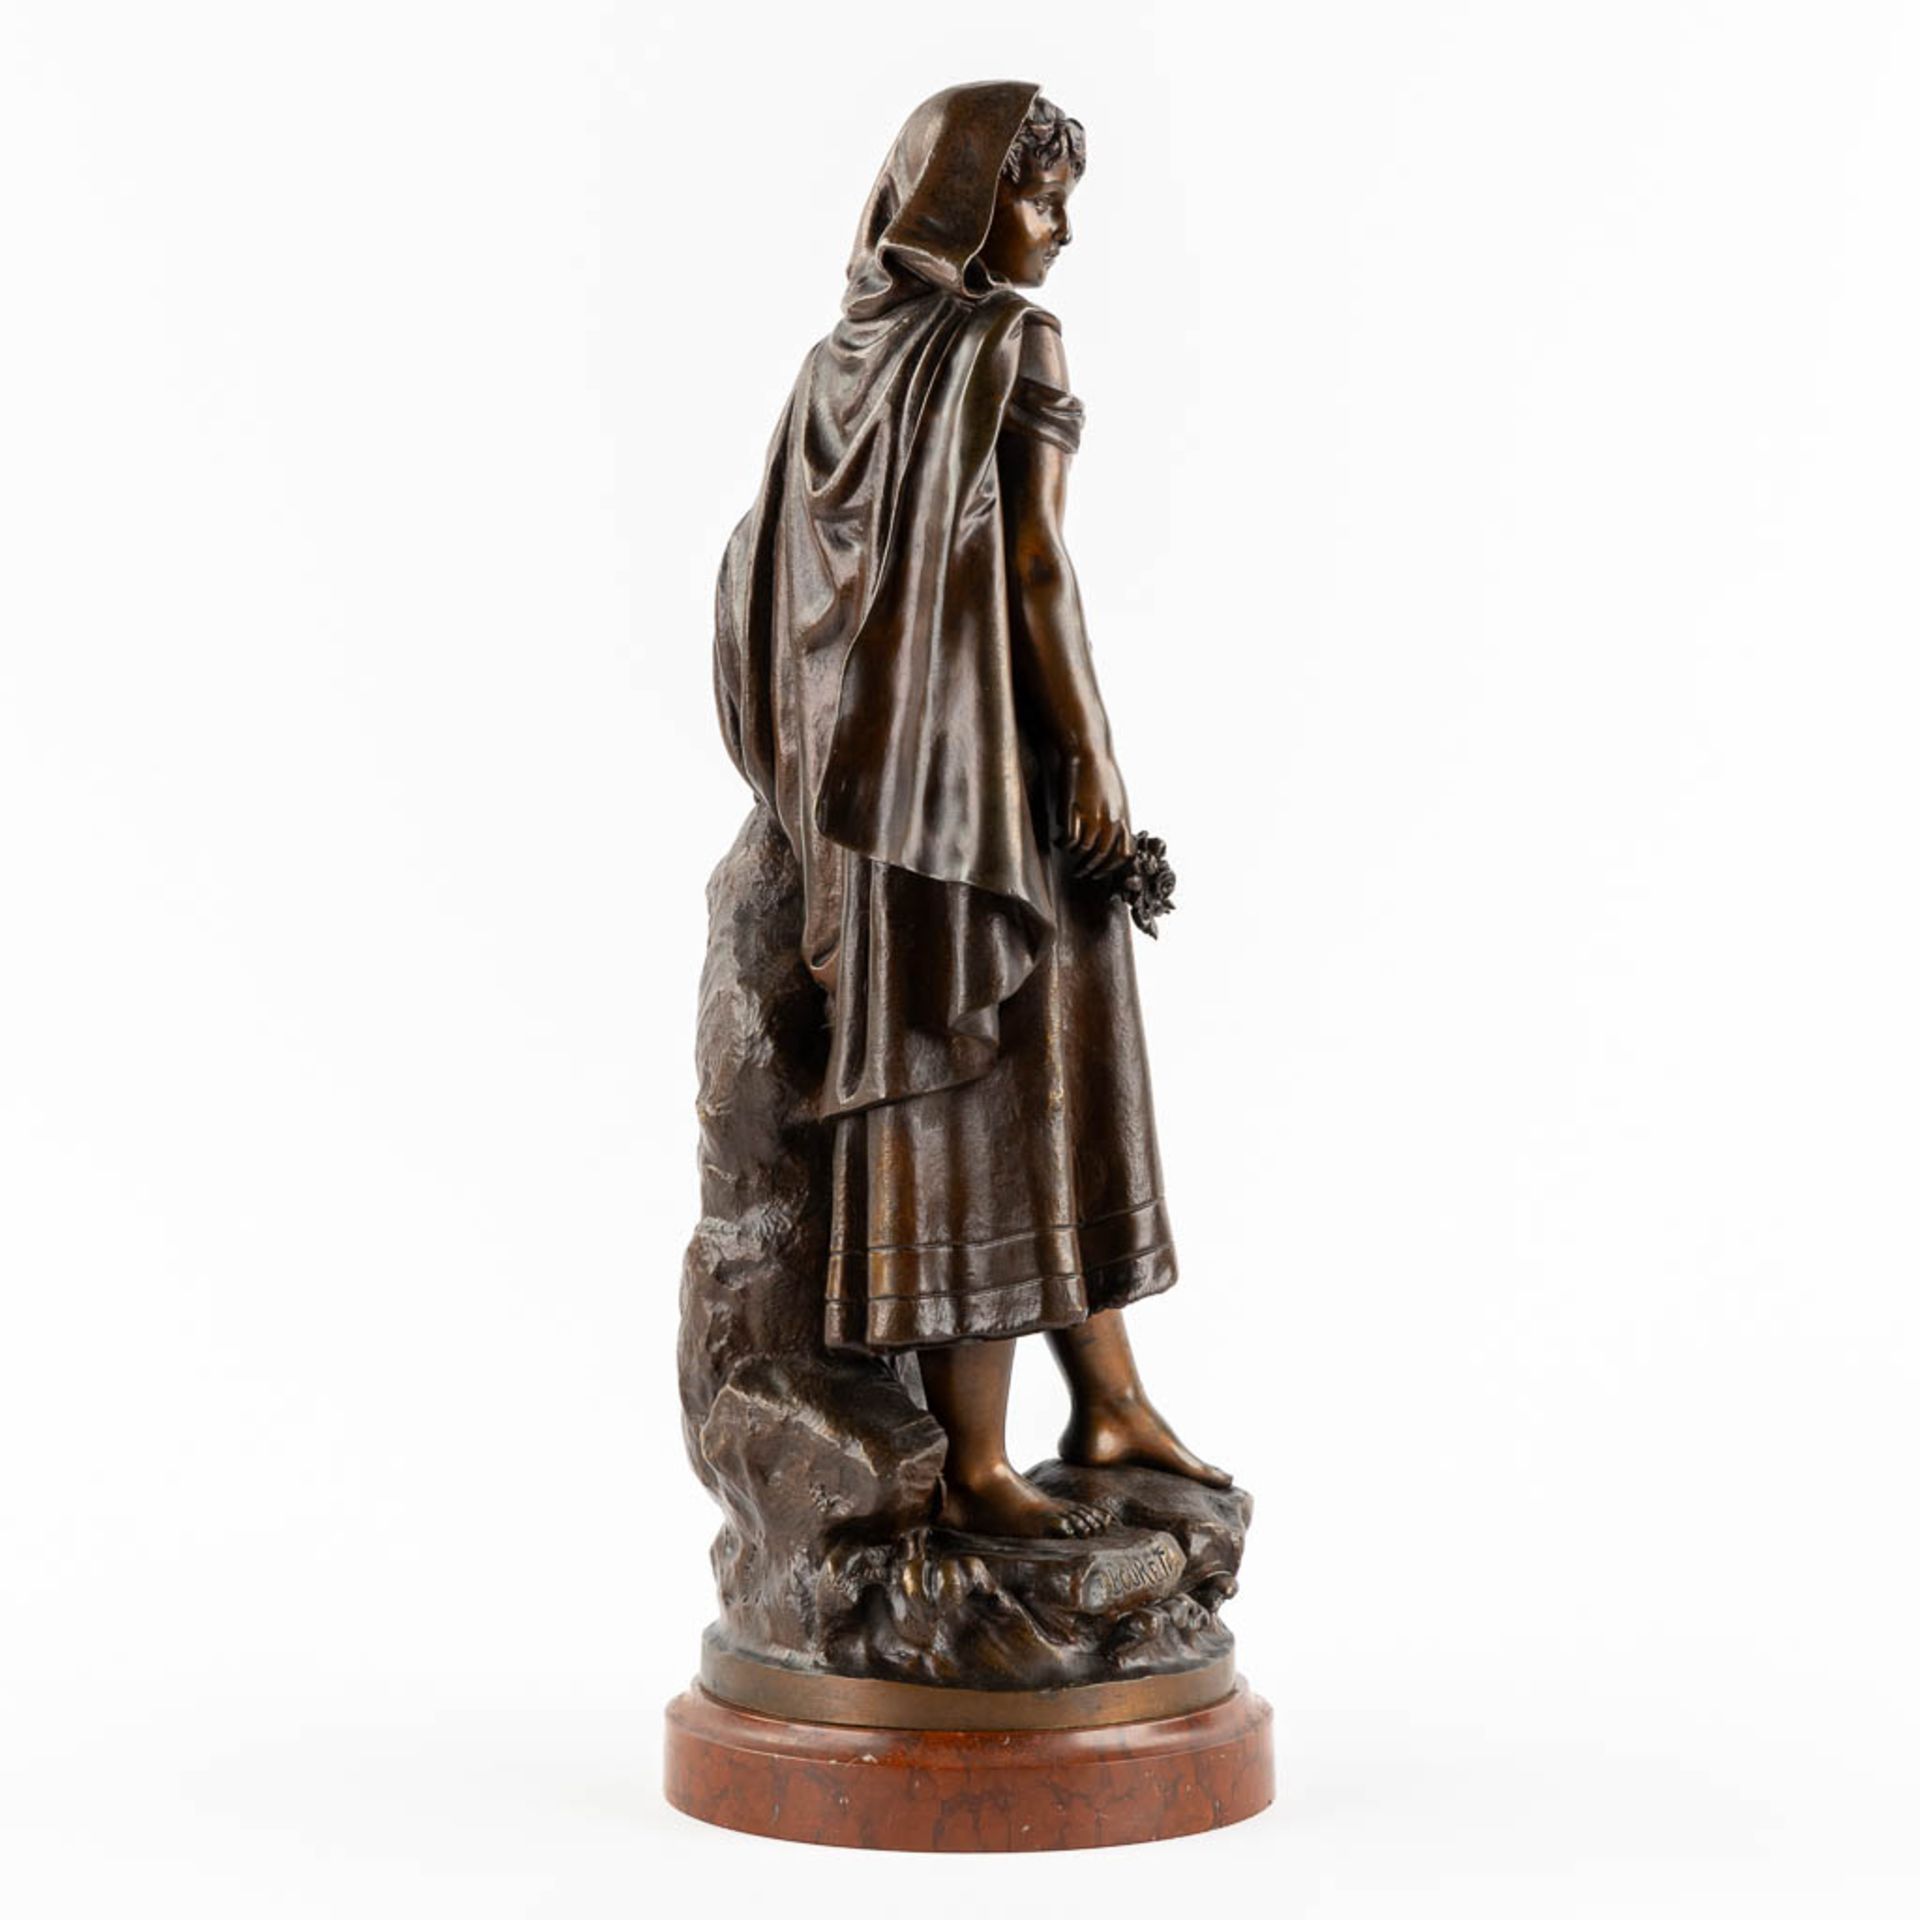 Eutrope BOURET (1833-1906) 'Lady with flowers' patinated bronze on a marble base. (L:19 x W:17 x H:4 - Image 4 of 11